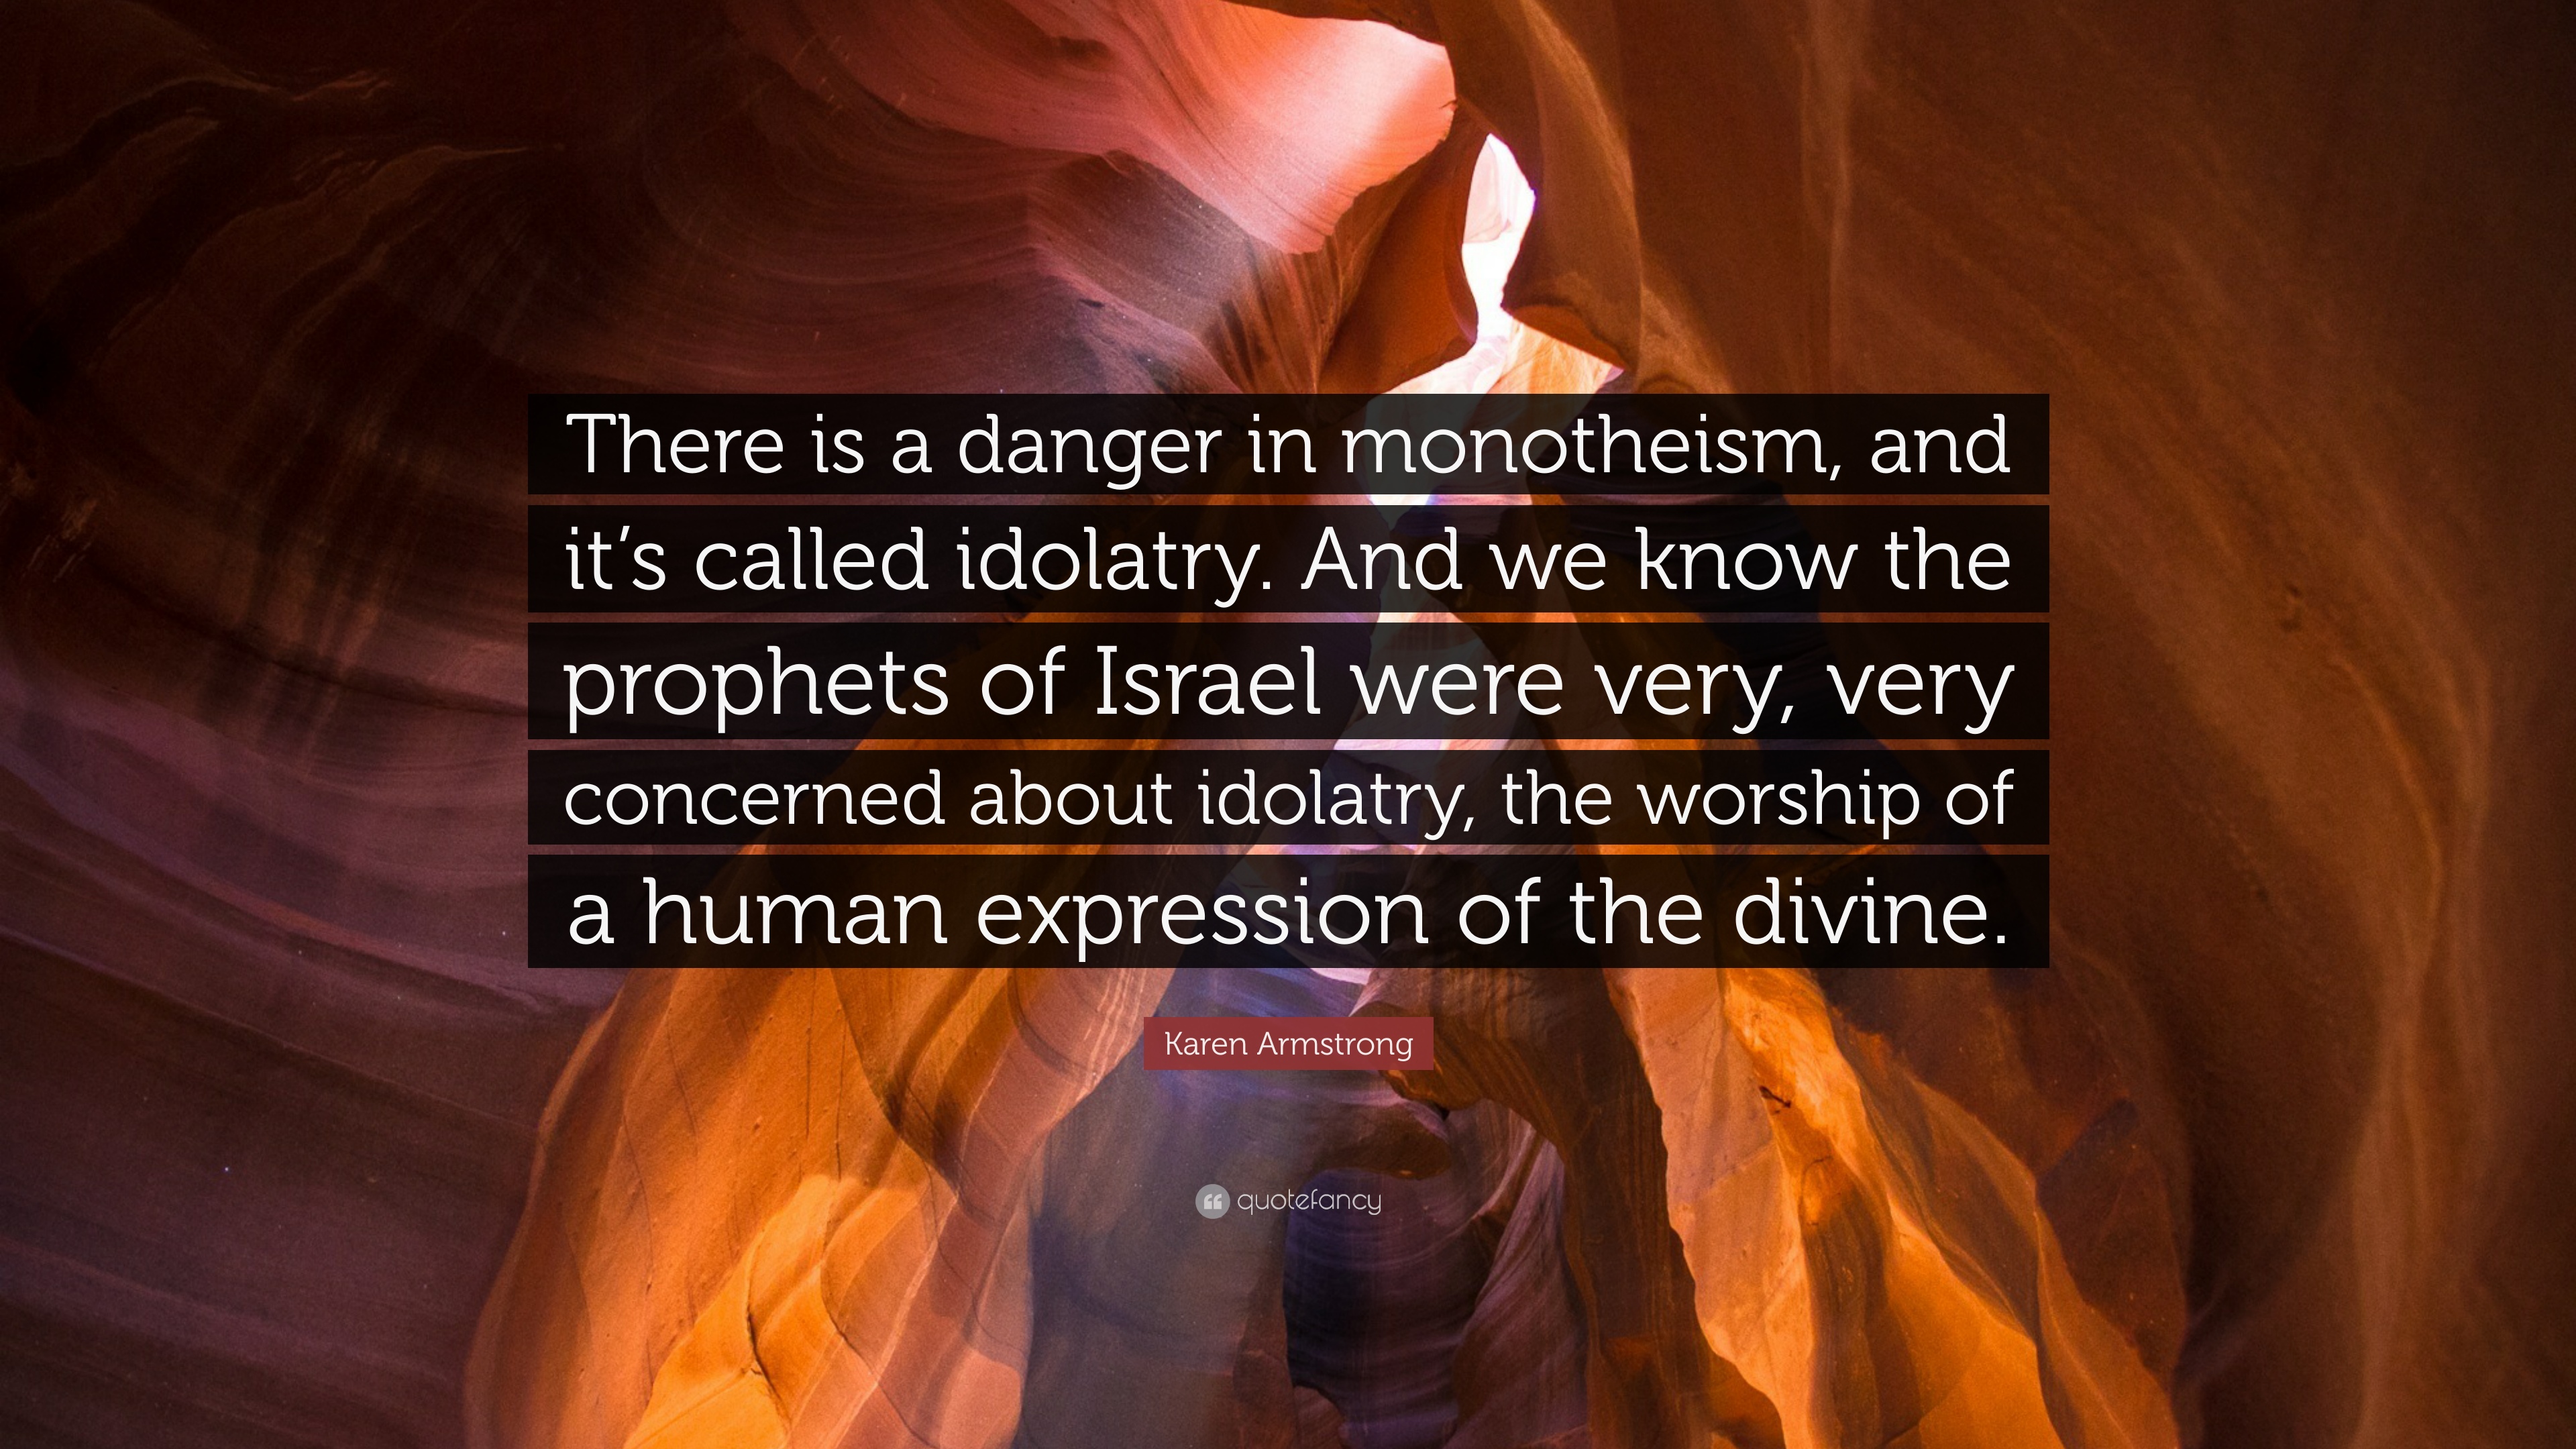 Karen Armstrong Quote: “There is a danger in monotheism, and it's